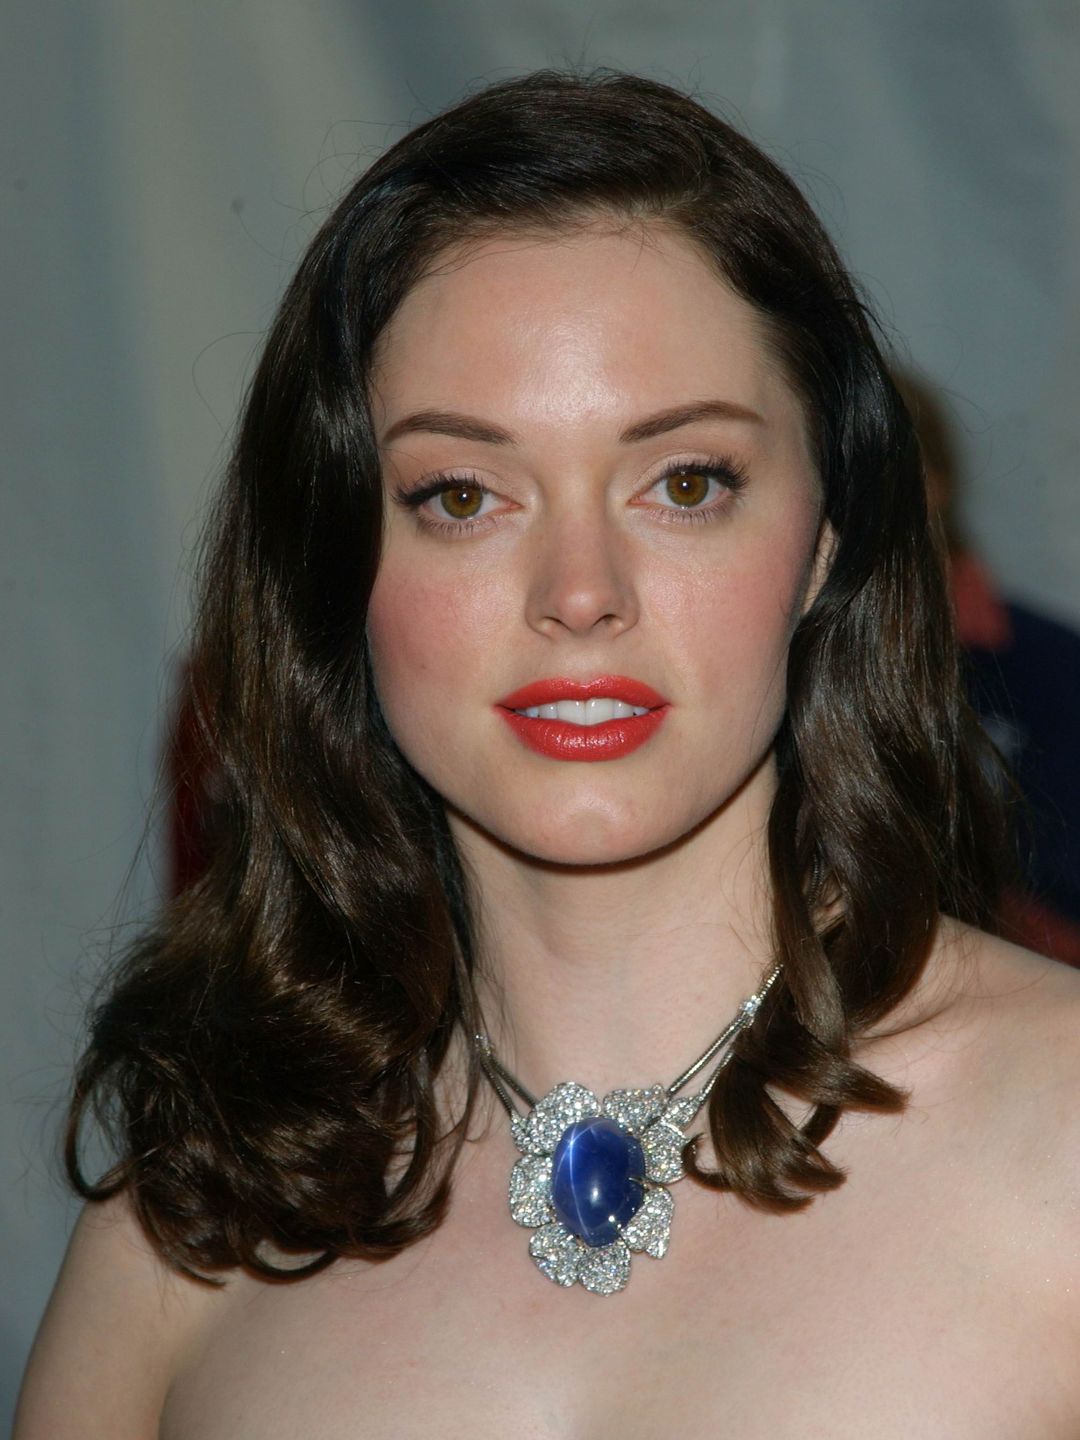 Rose McGowan unphotoshopped pictures